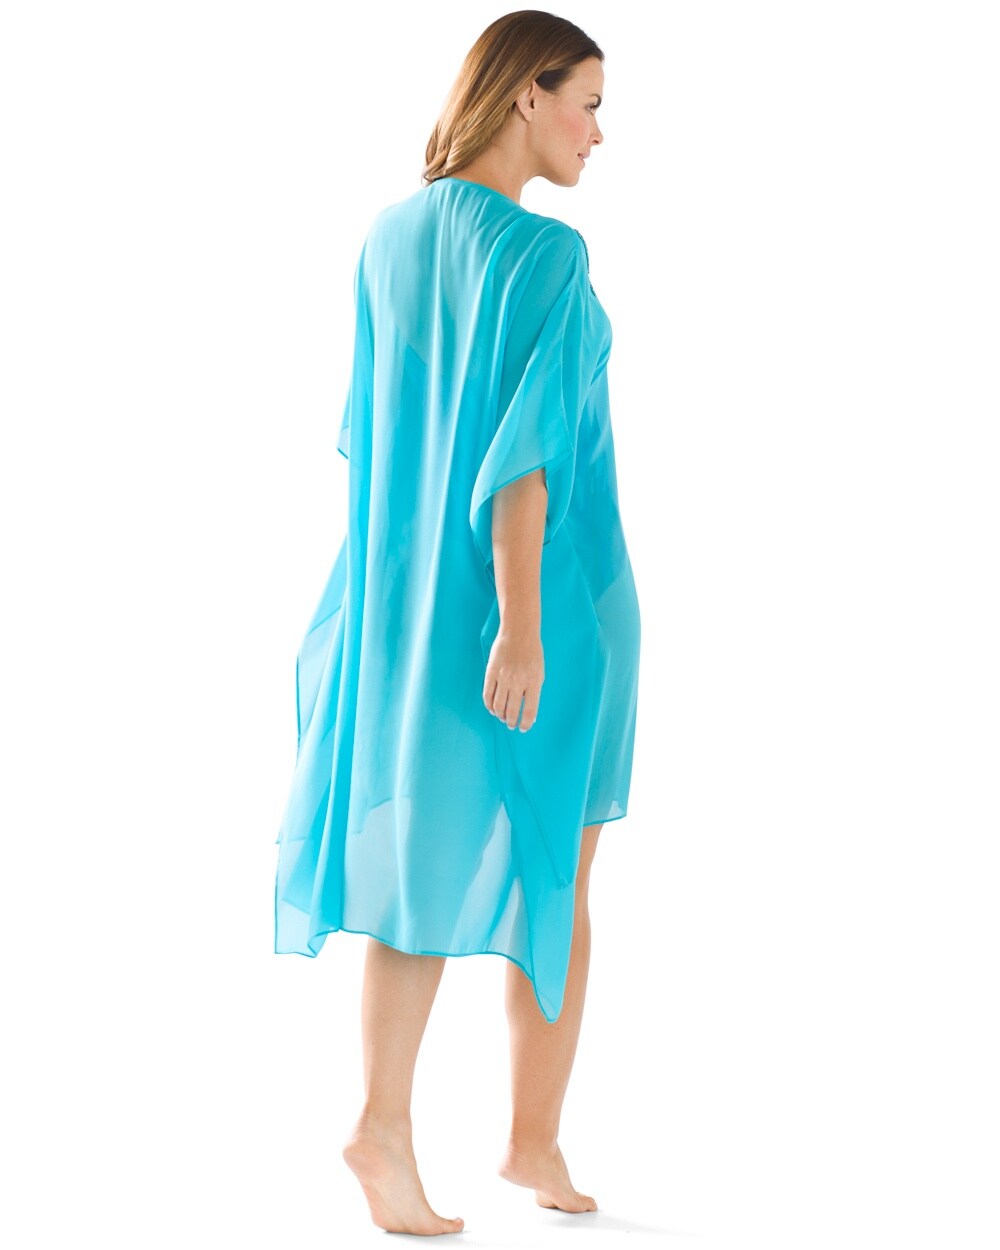 Embellished Caftan Swim Cover Up - Chico's